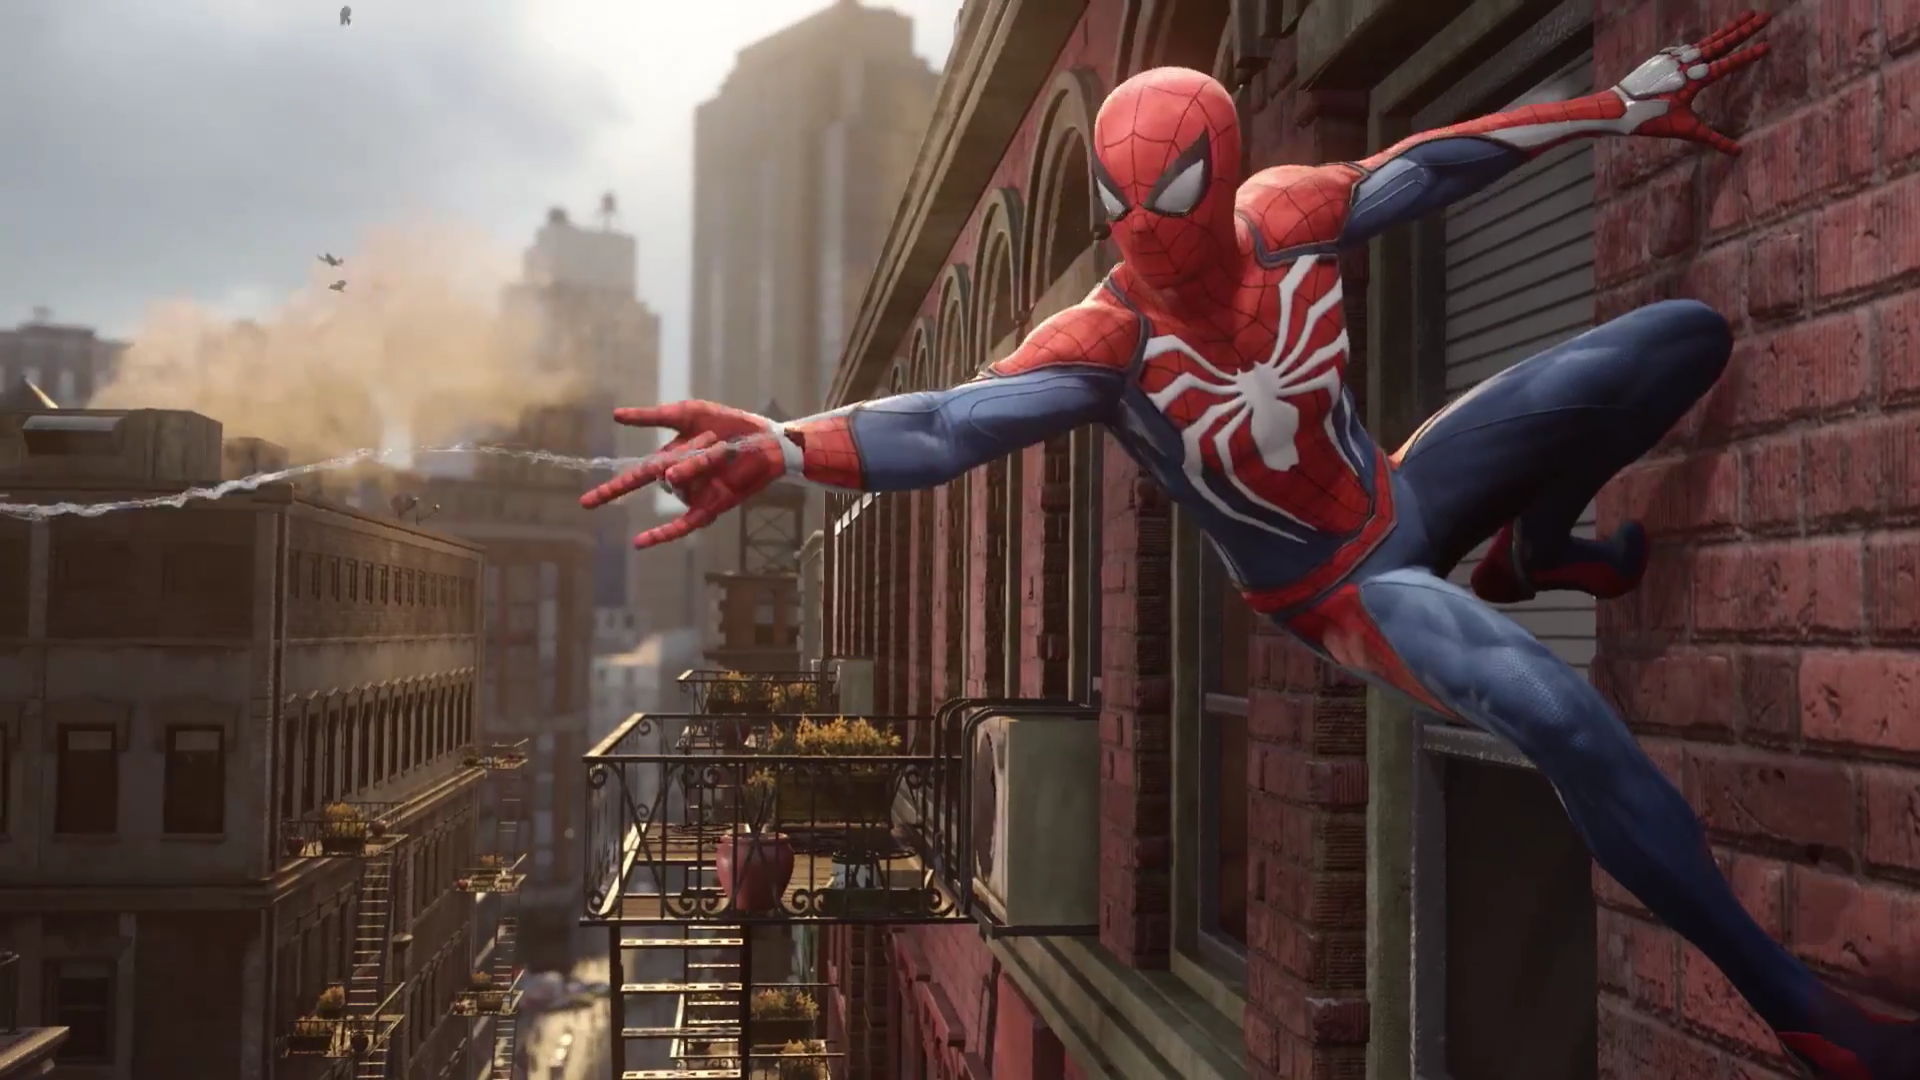 PS4 Exclusive Spider-Man Uses Insomniac Engine; Naughty Dog Not Involved  With Engine Development and More